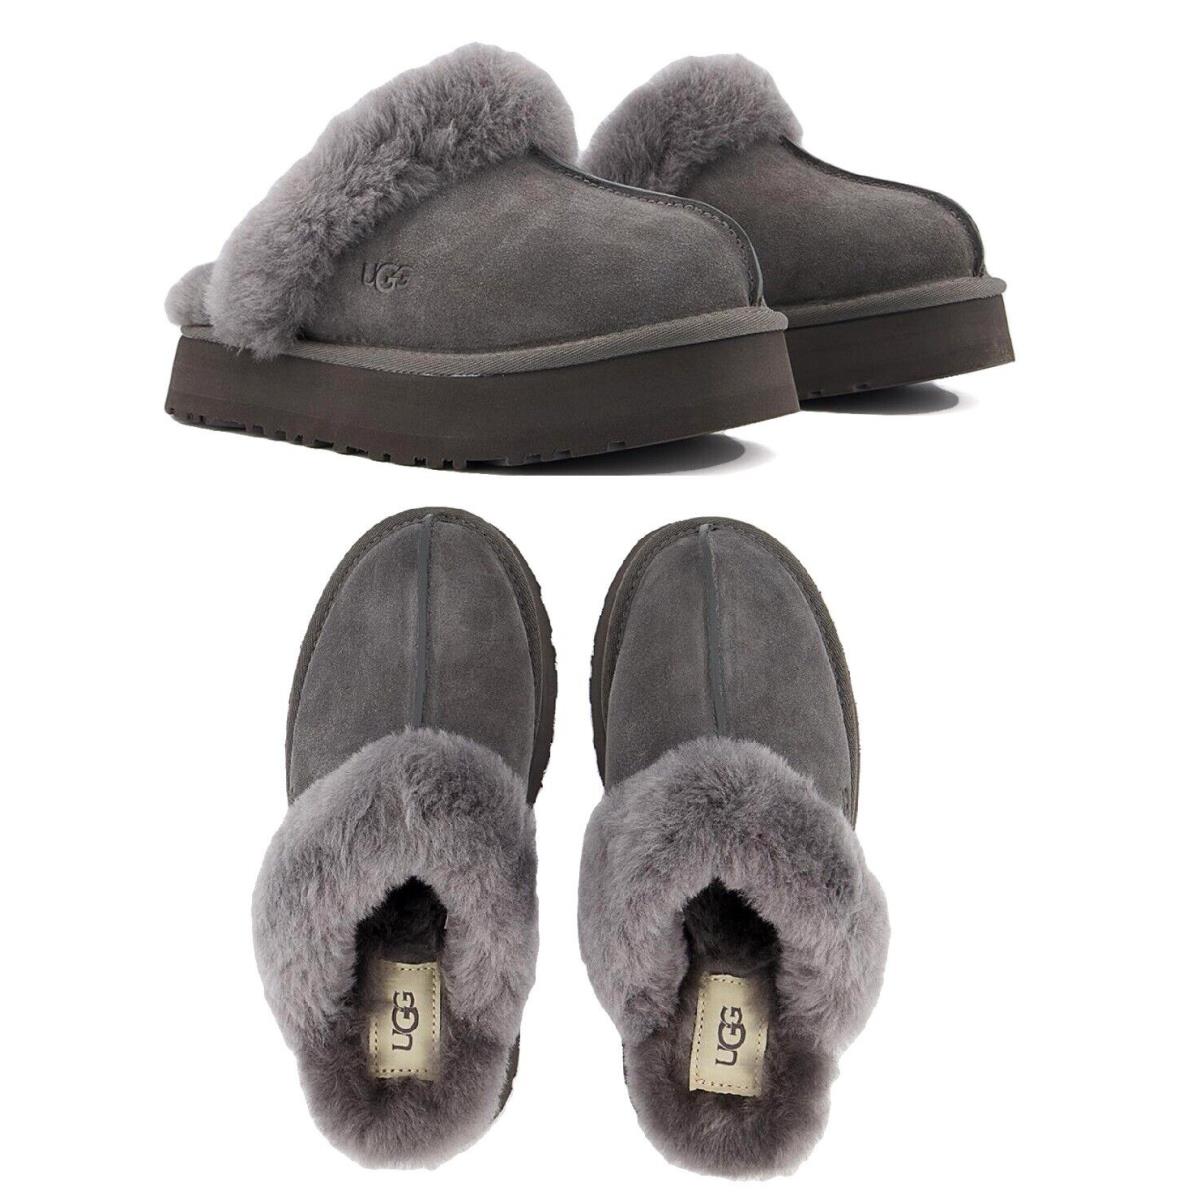 Ugg Disquette 1122550 Charcoal Women Shoes Slippers Sandals